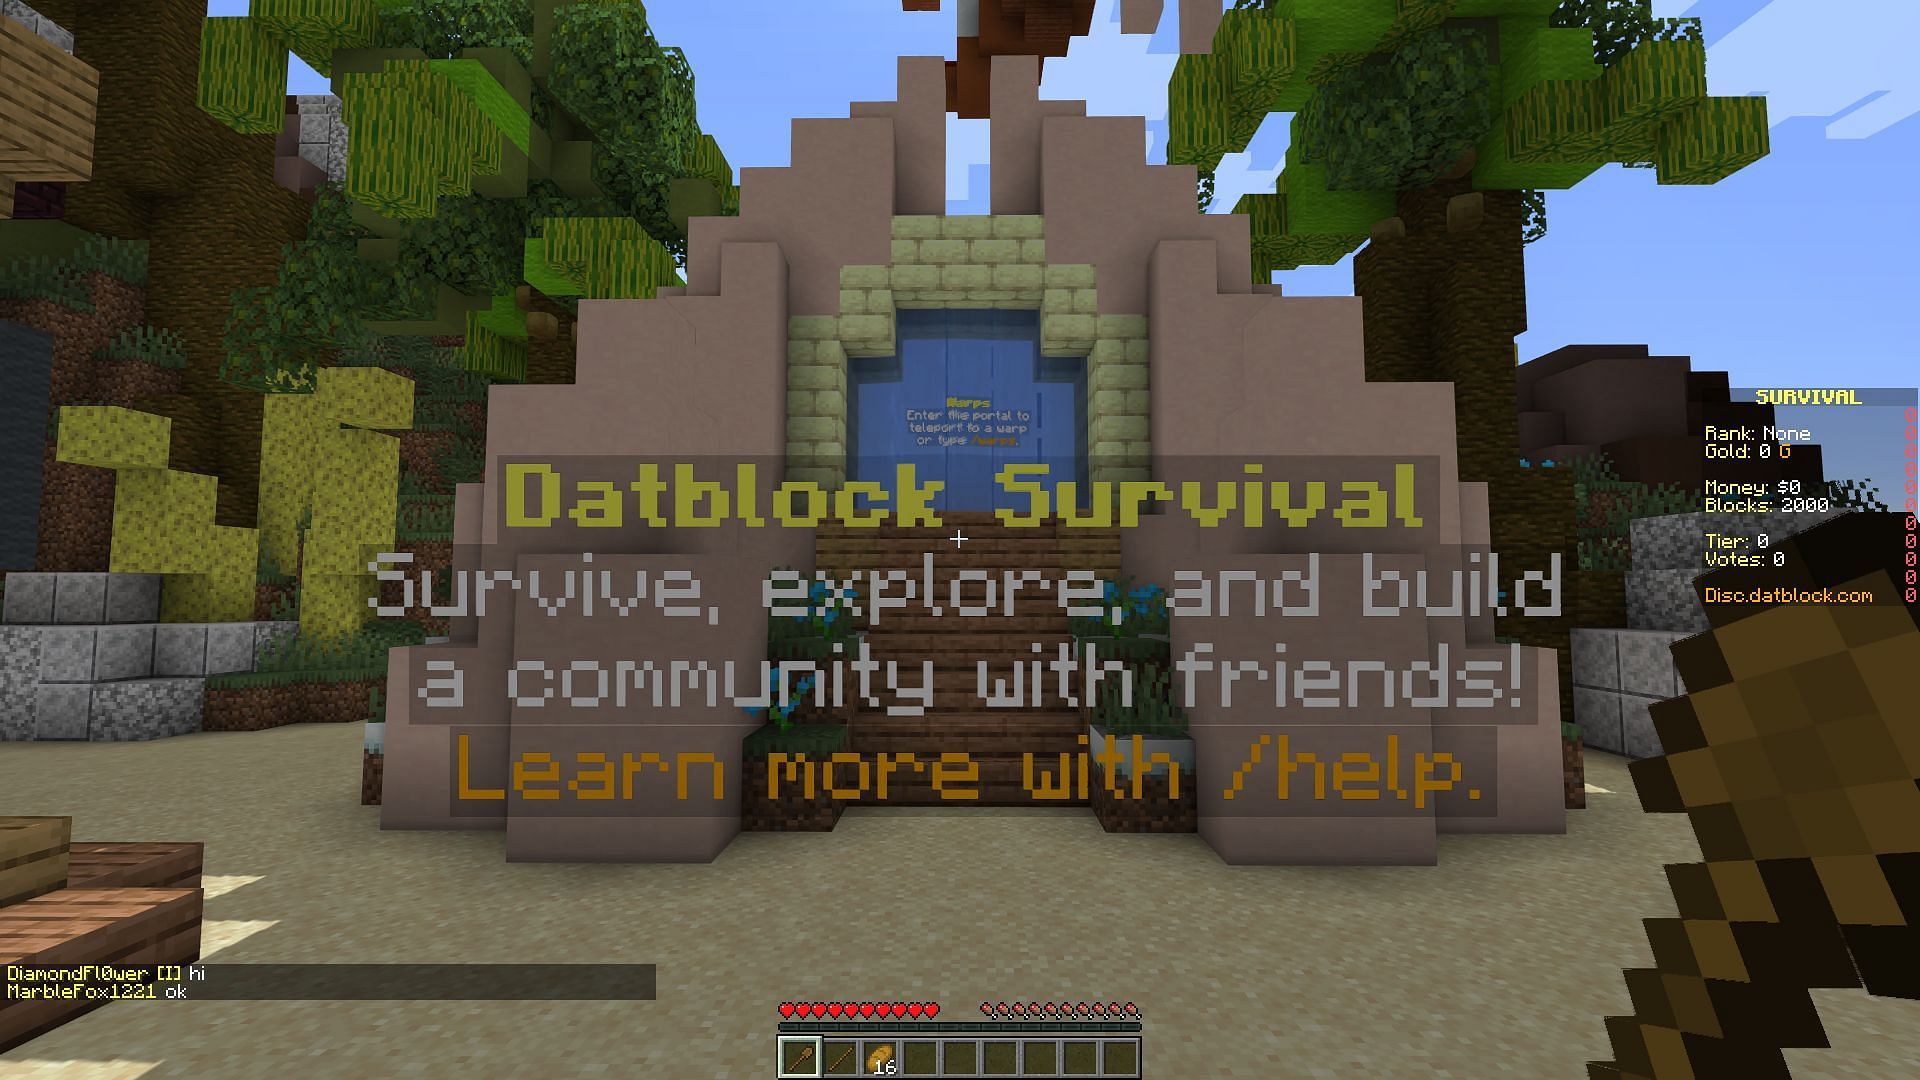 An example of a server spawn area, where players can find contact information for server administrators (Image via Minecraft)